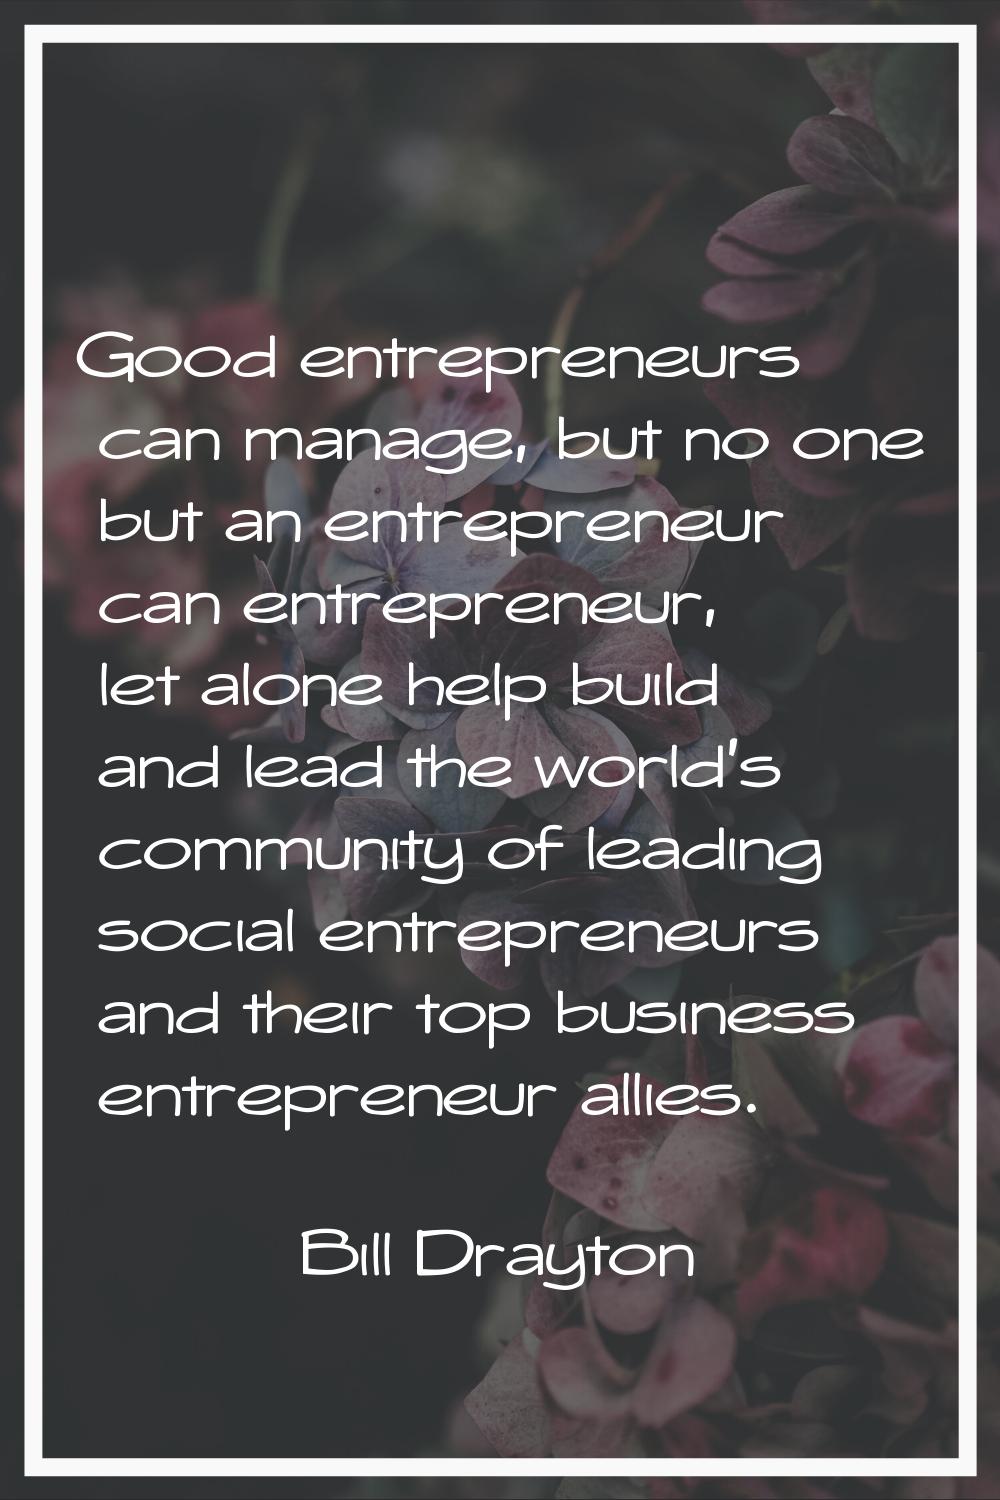 Good entrepreneurs can manage, but no one but an entrepreneur can entrepreneur, let alone help buil